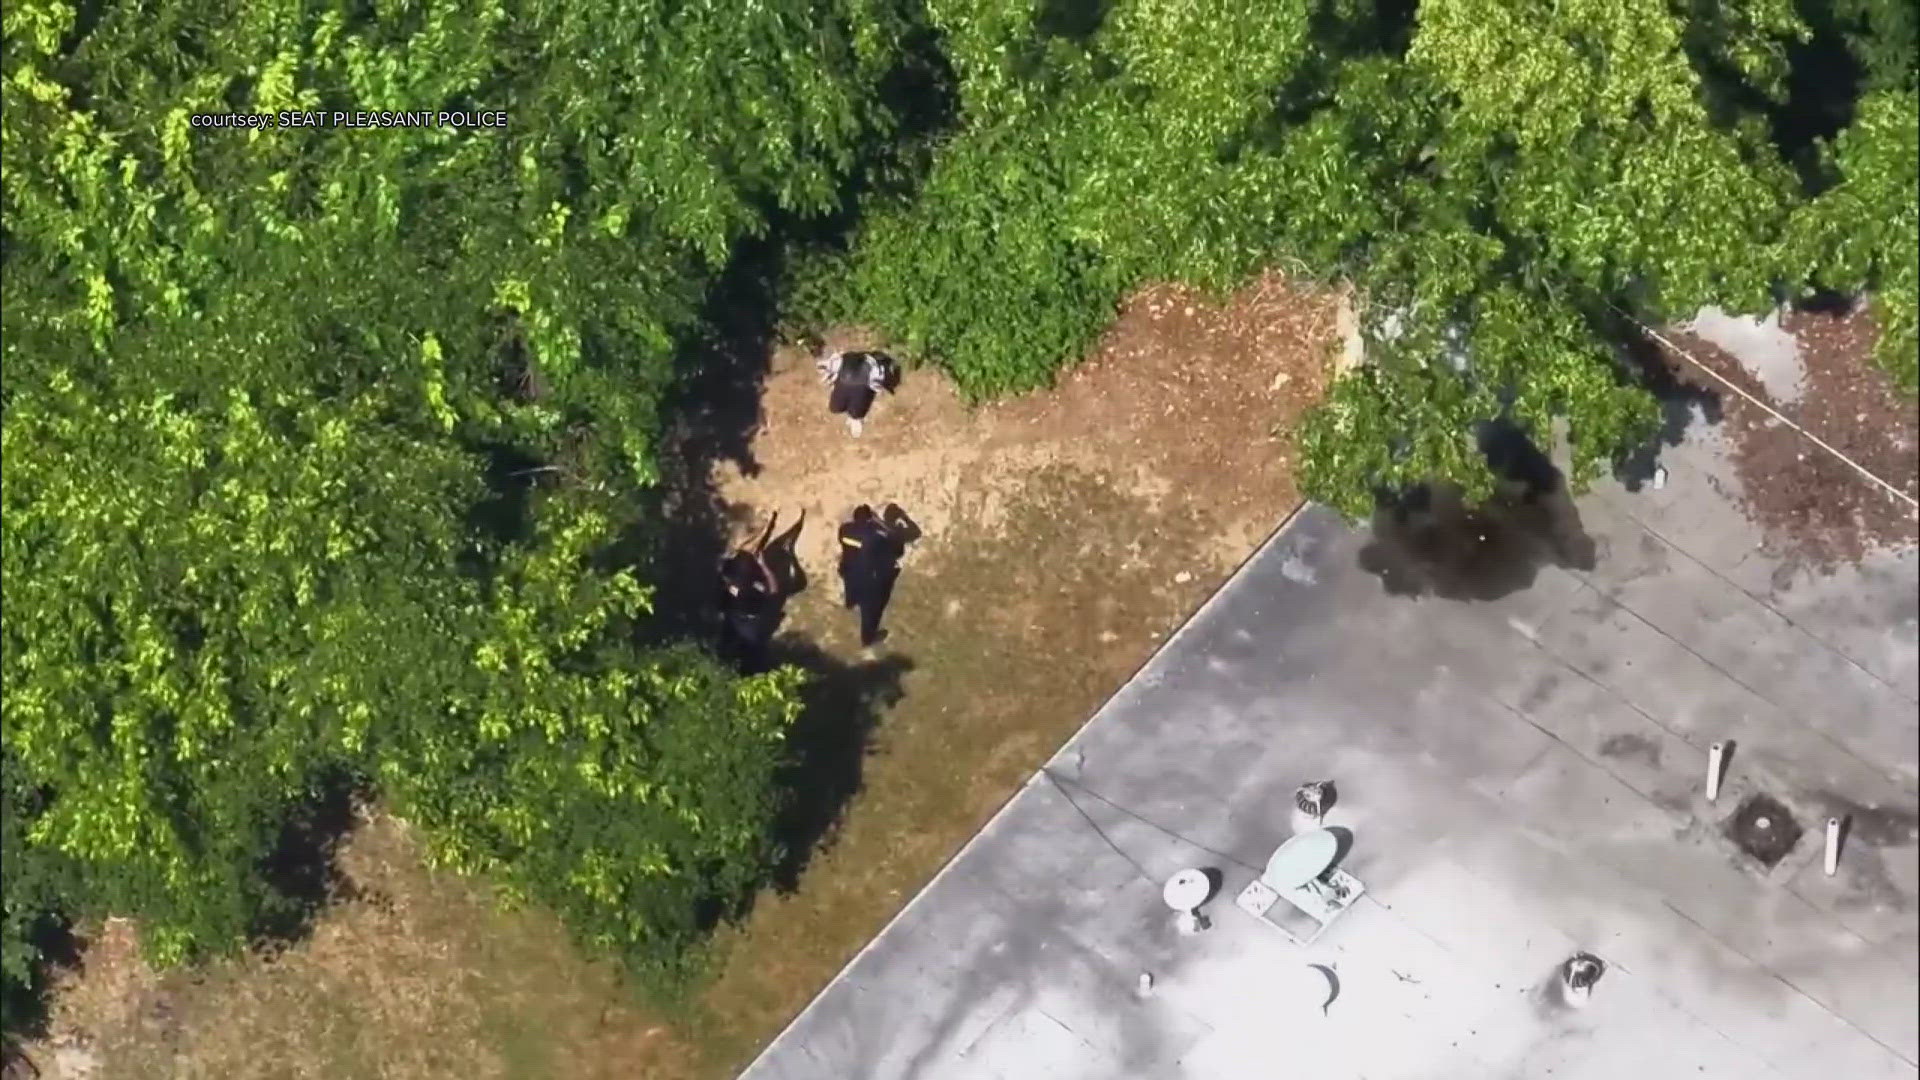 The department says it launched its drone program in 2023 to assist patrol officers with critical support